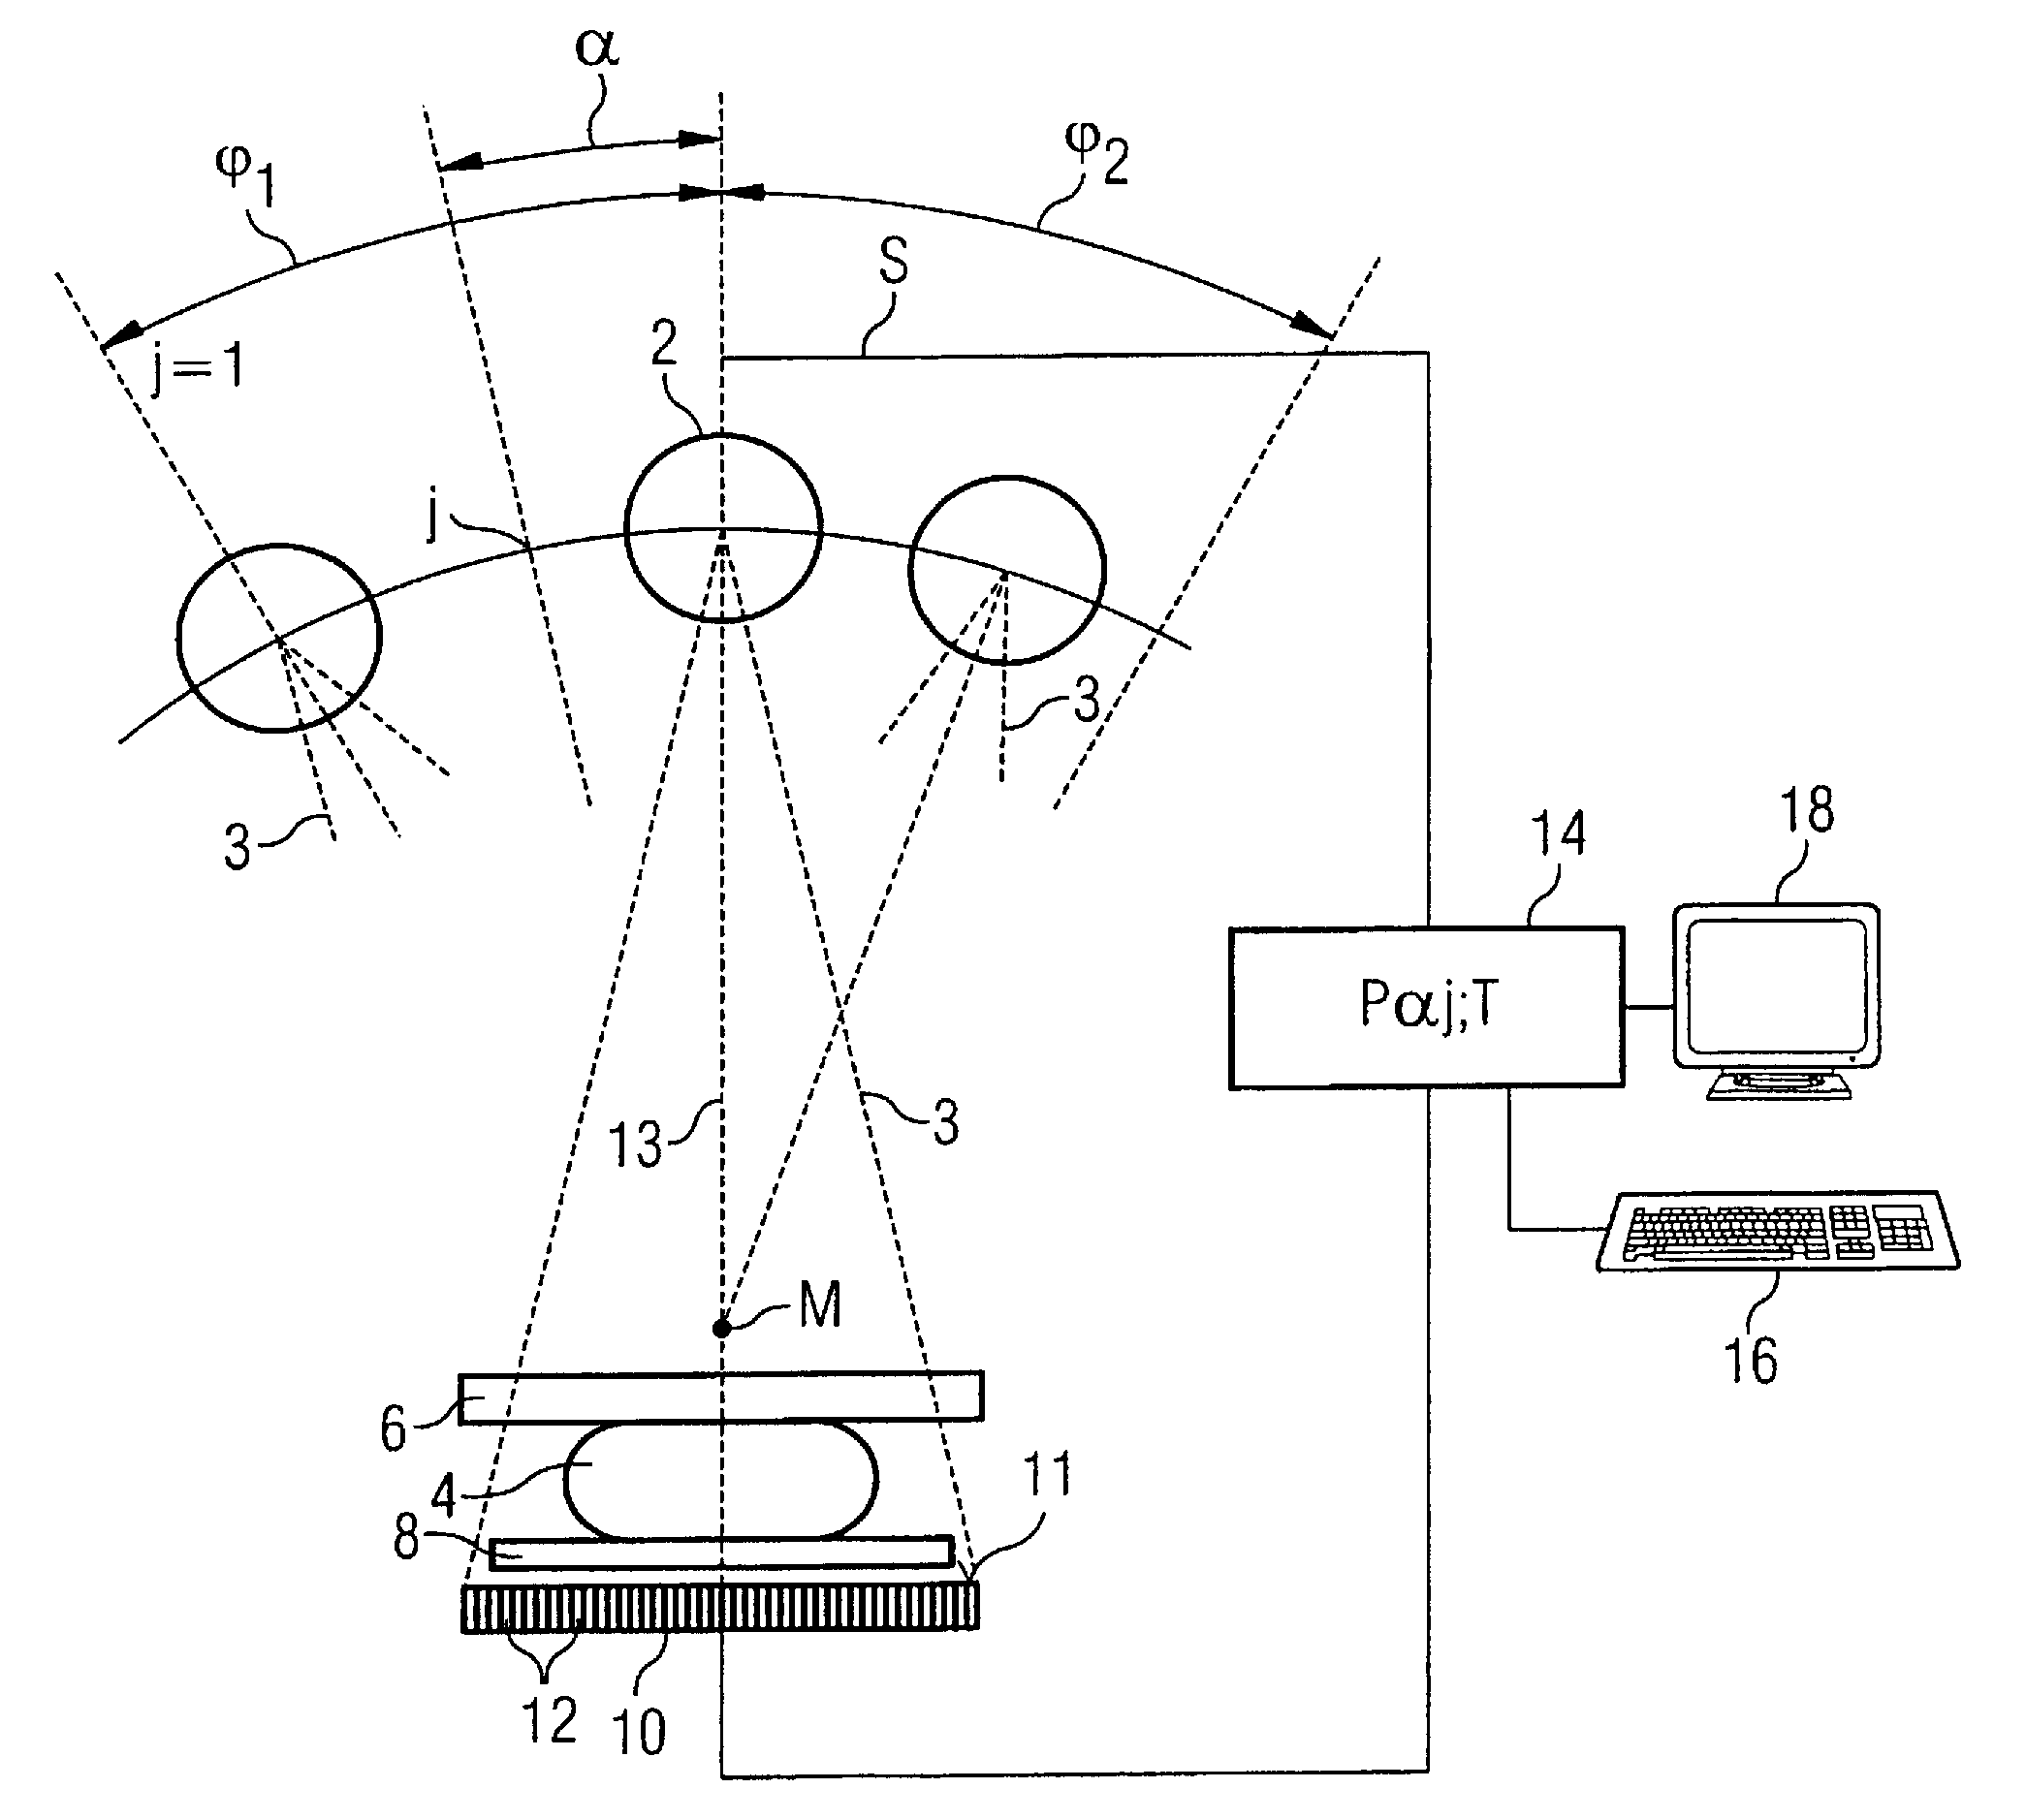 Tomographic image reconstruction method and apparatus using filtered back projection